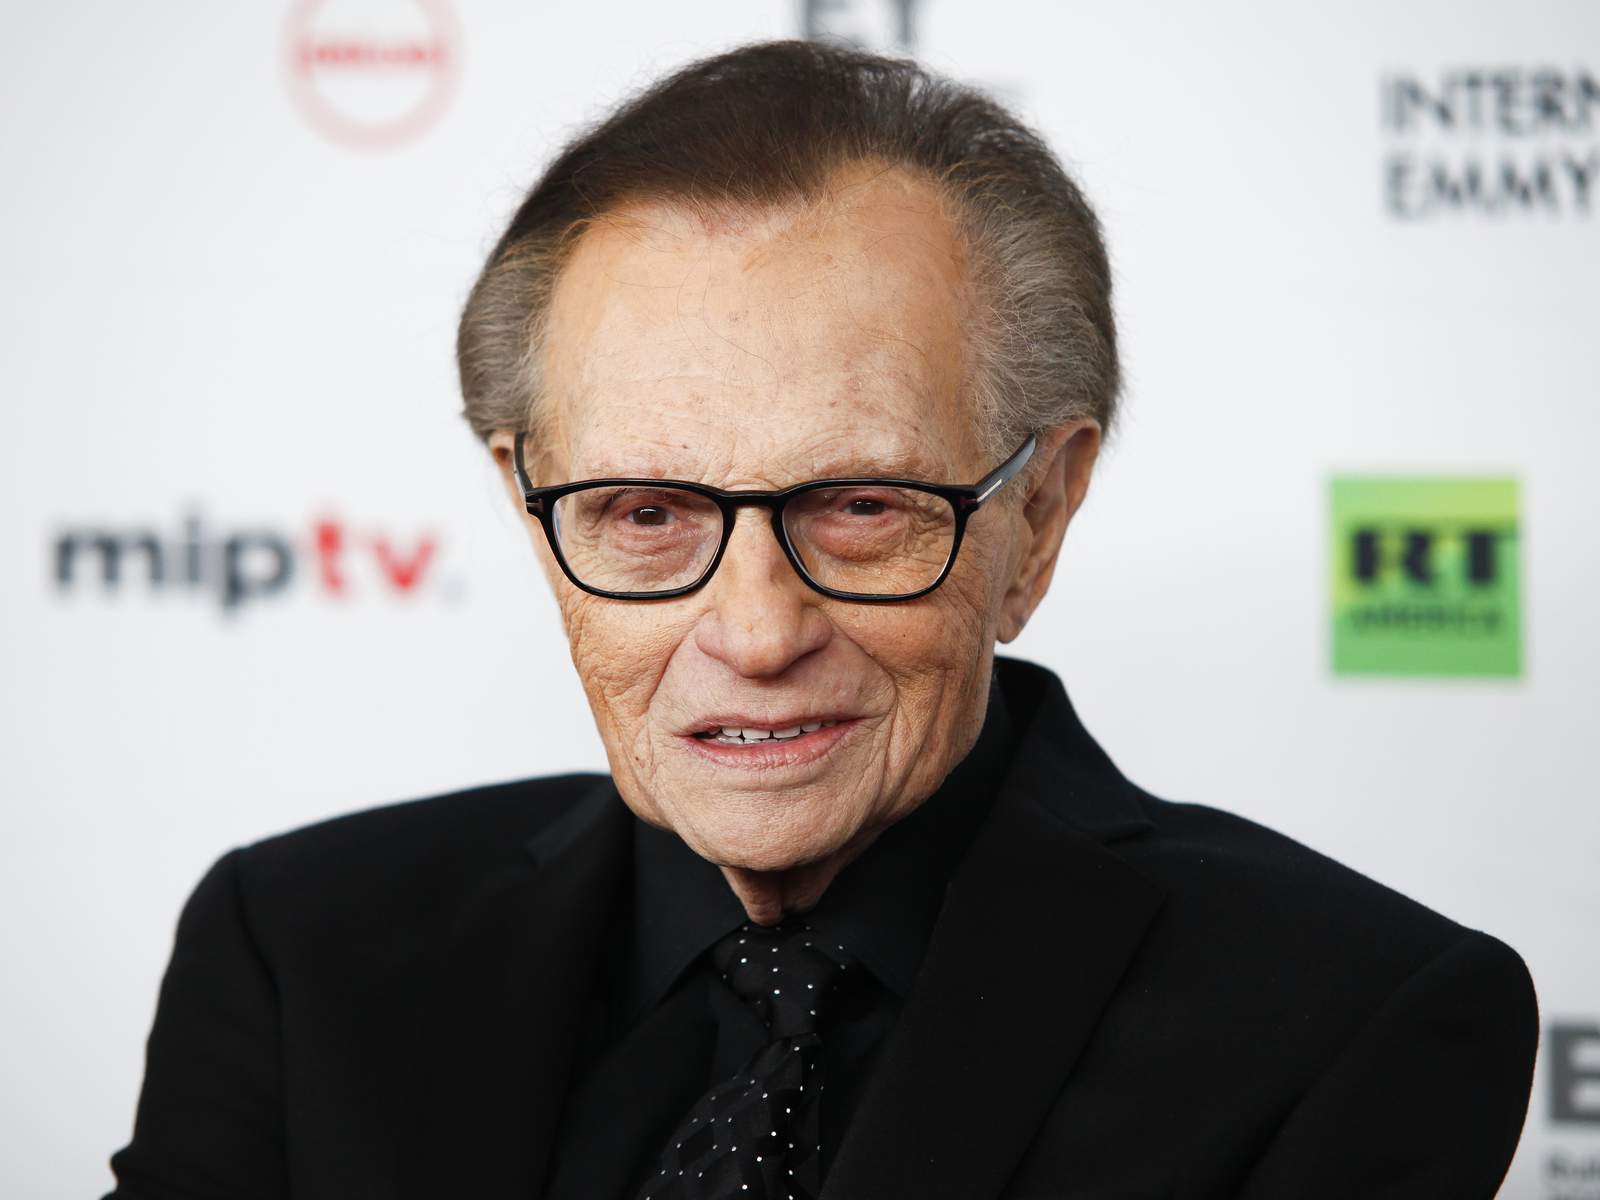 Larry King, hospitalized with COVID, moved out of ICU